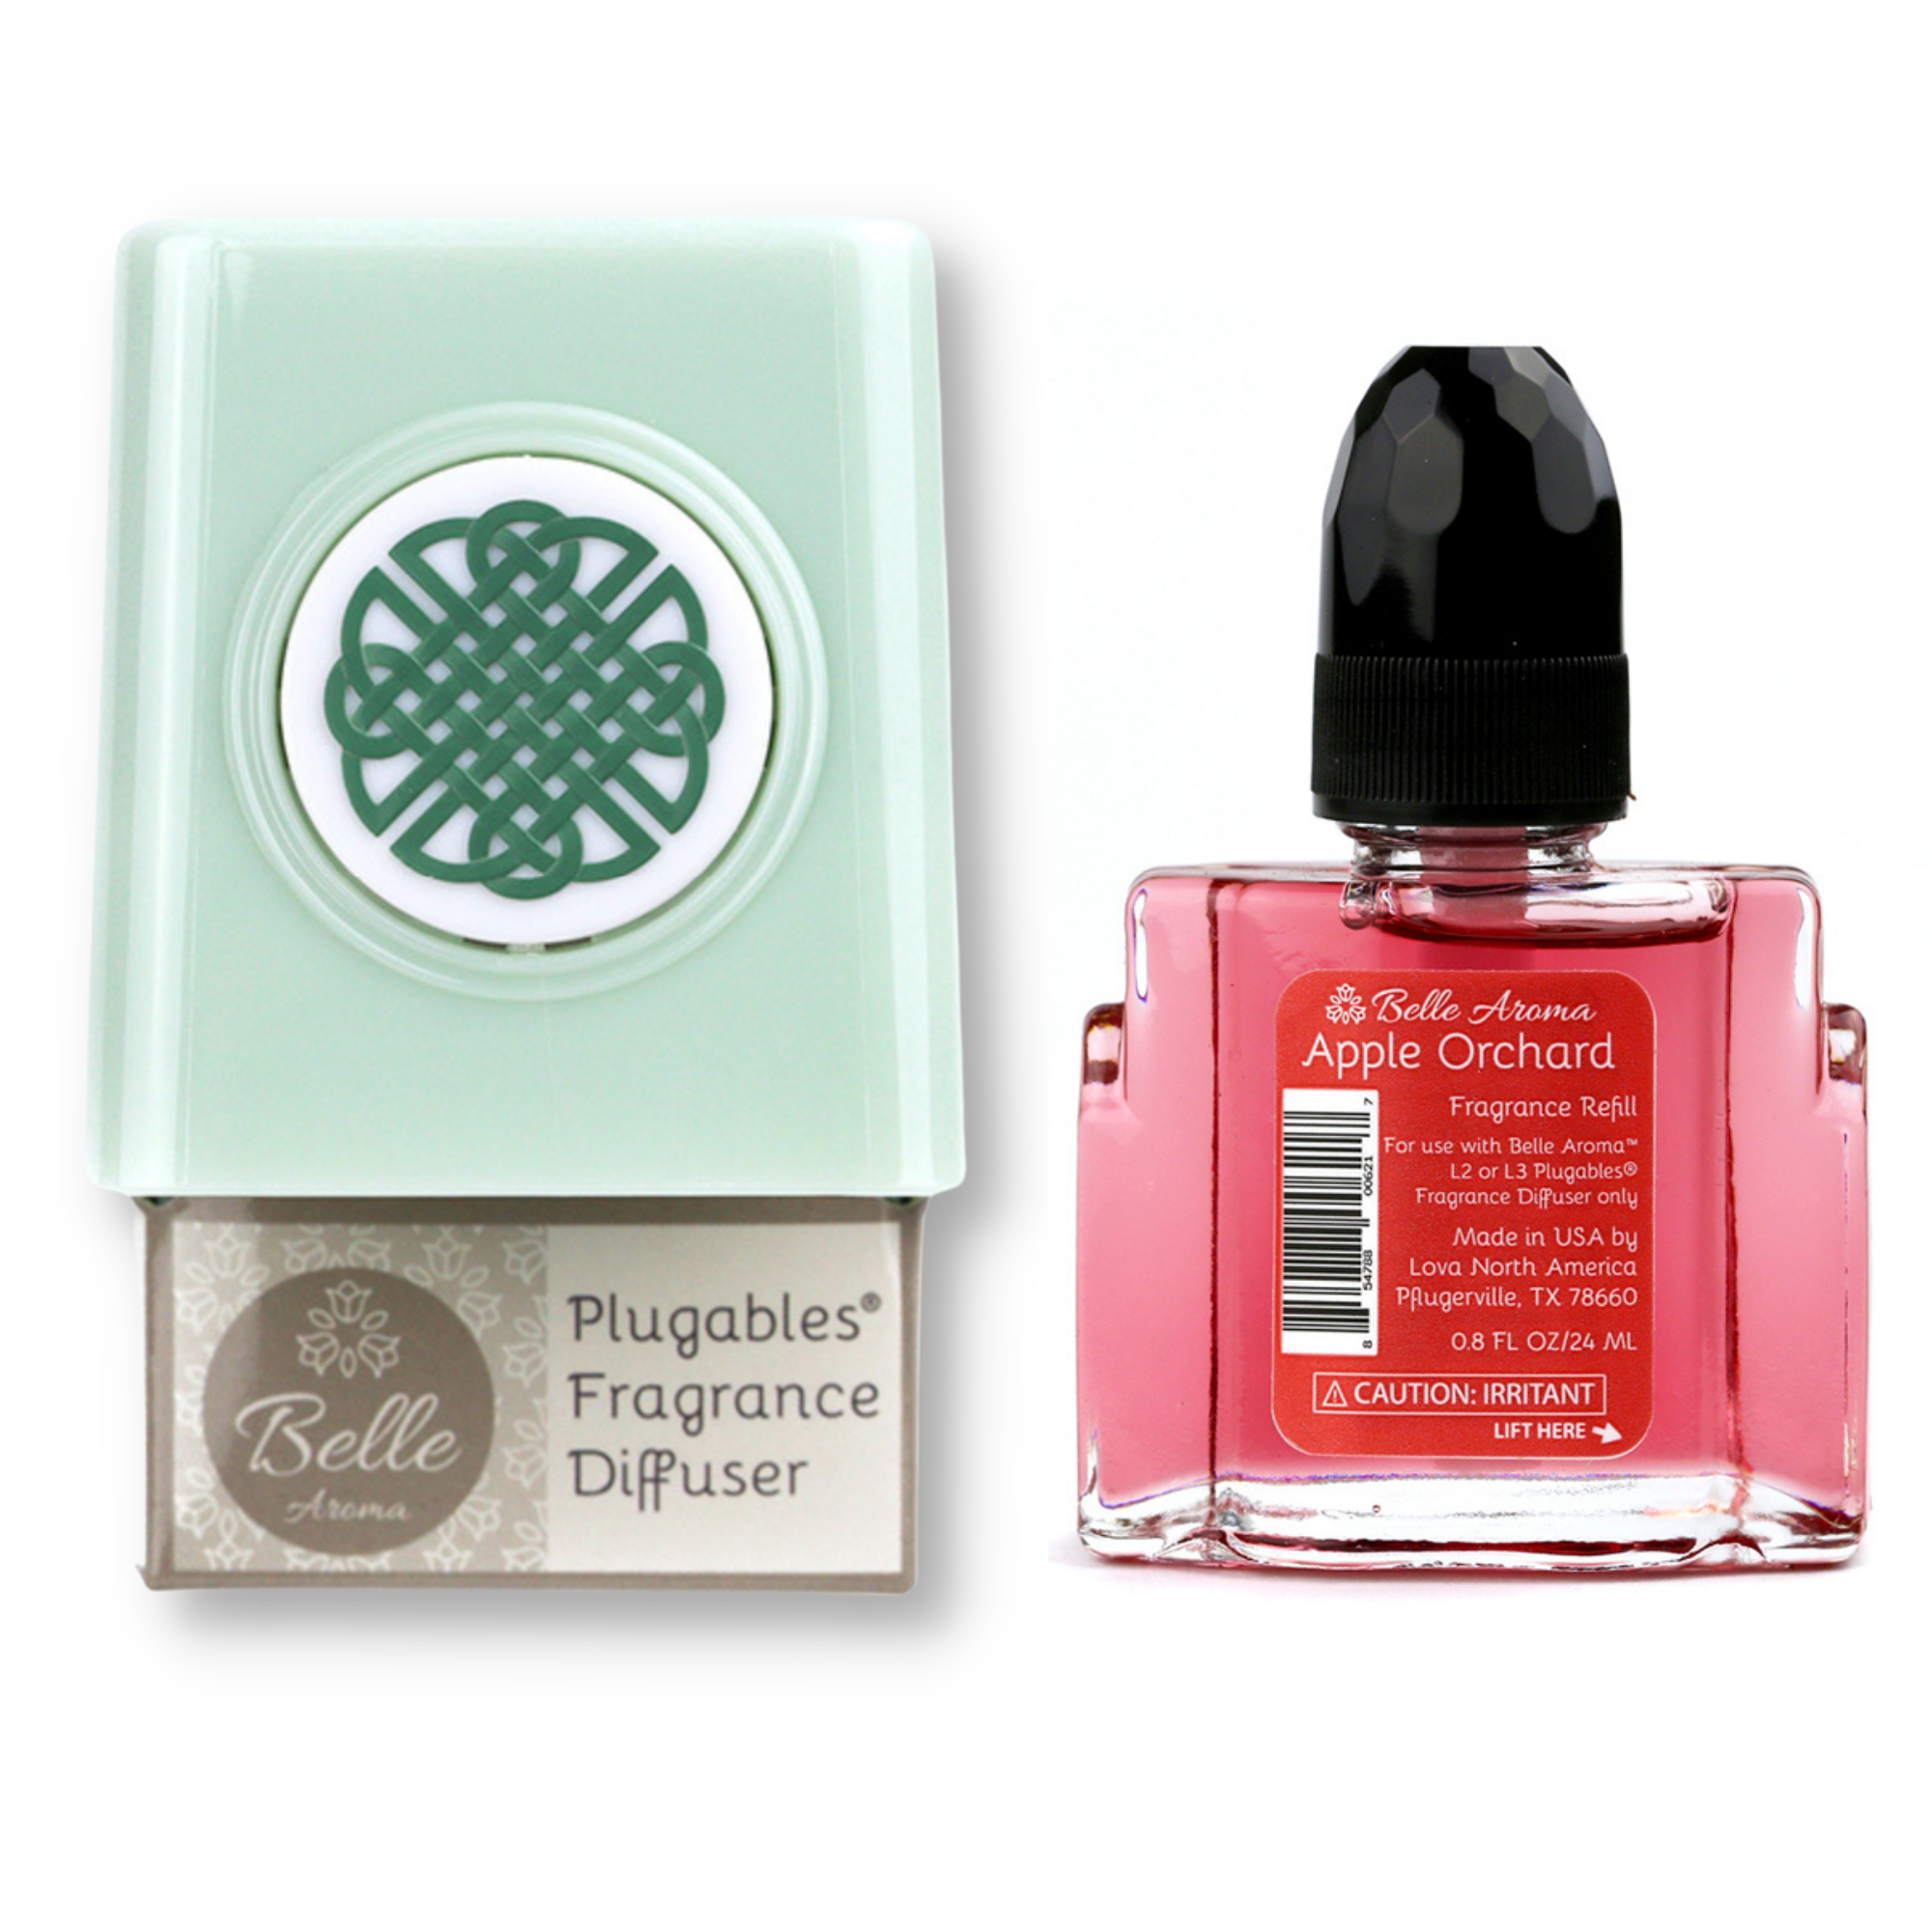 Celtic Knot Medallion Plugables® Plugin Electric Scented Oil Diffuser - Sea Glass with Apple Orchard Fragrance Oil Home Fragrance Accessories